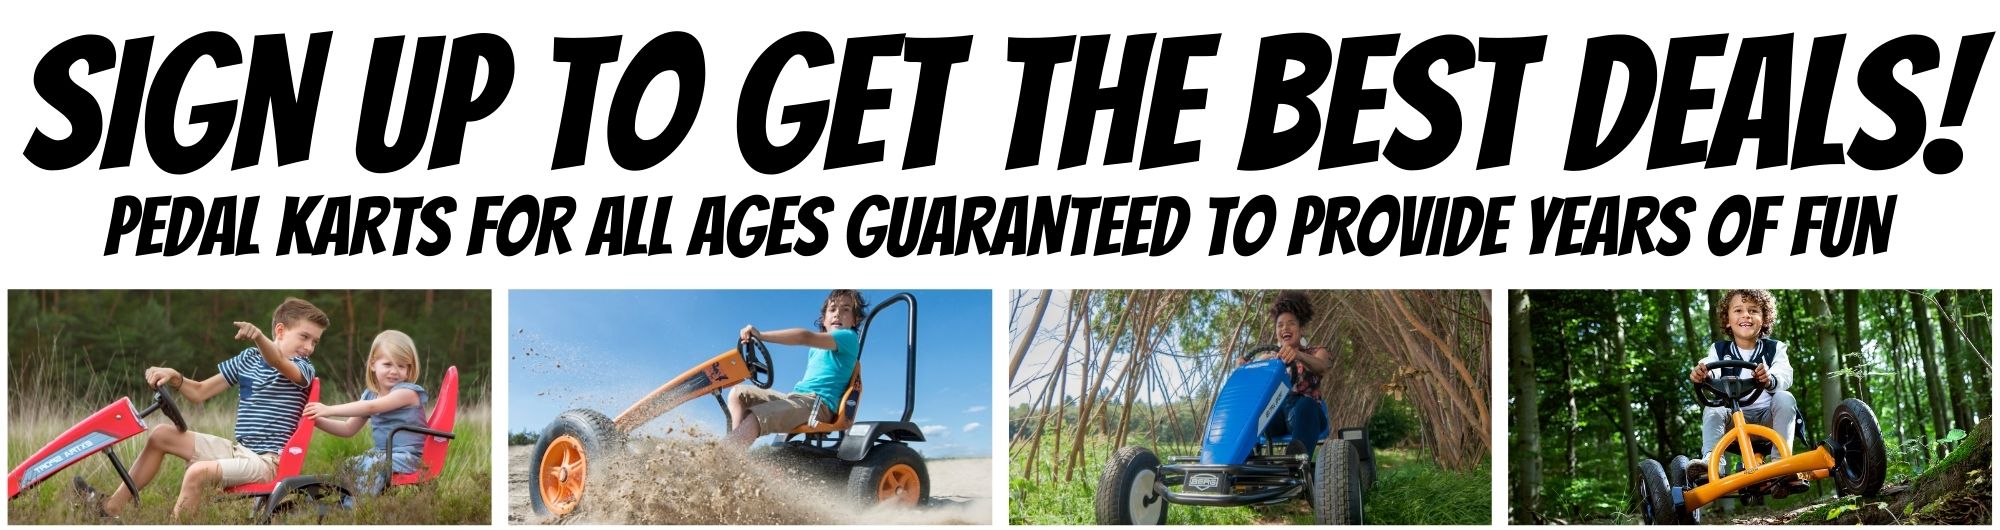 Deeply discounted pedal karts for all ages. Save big on our collection of pedal karts.